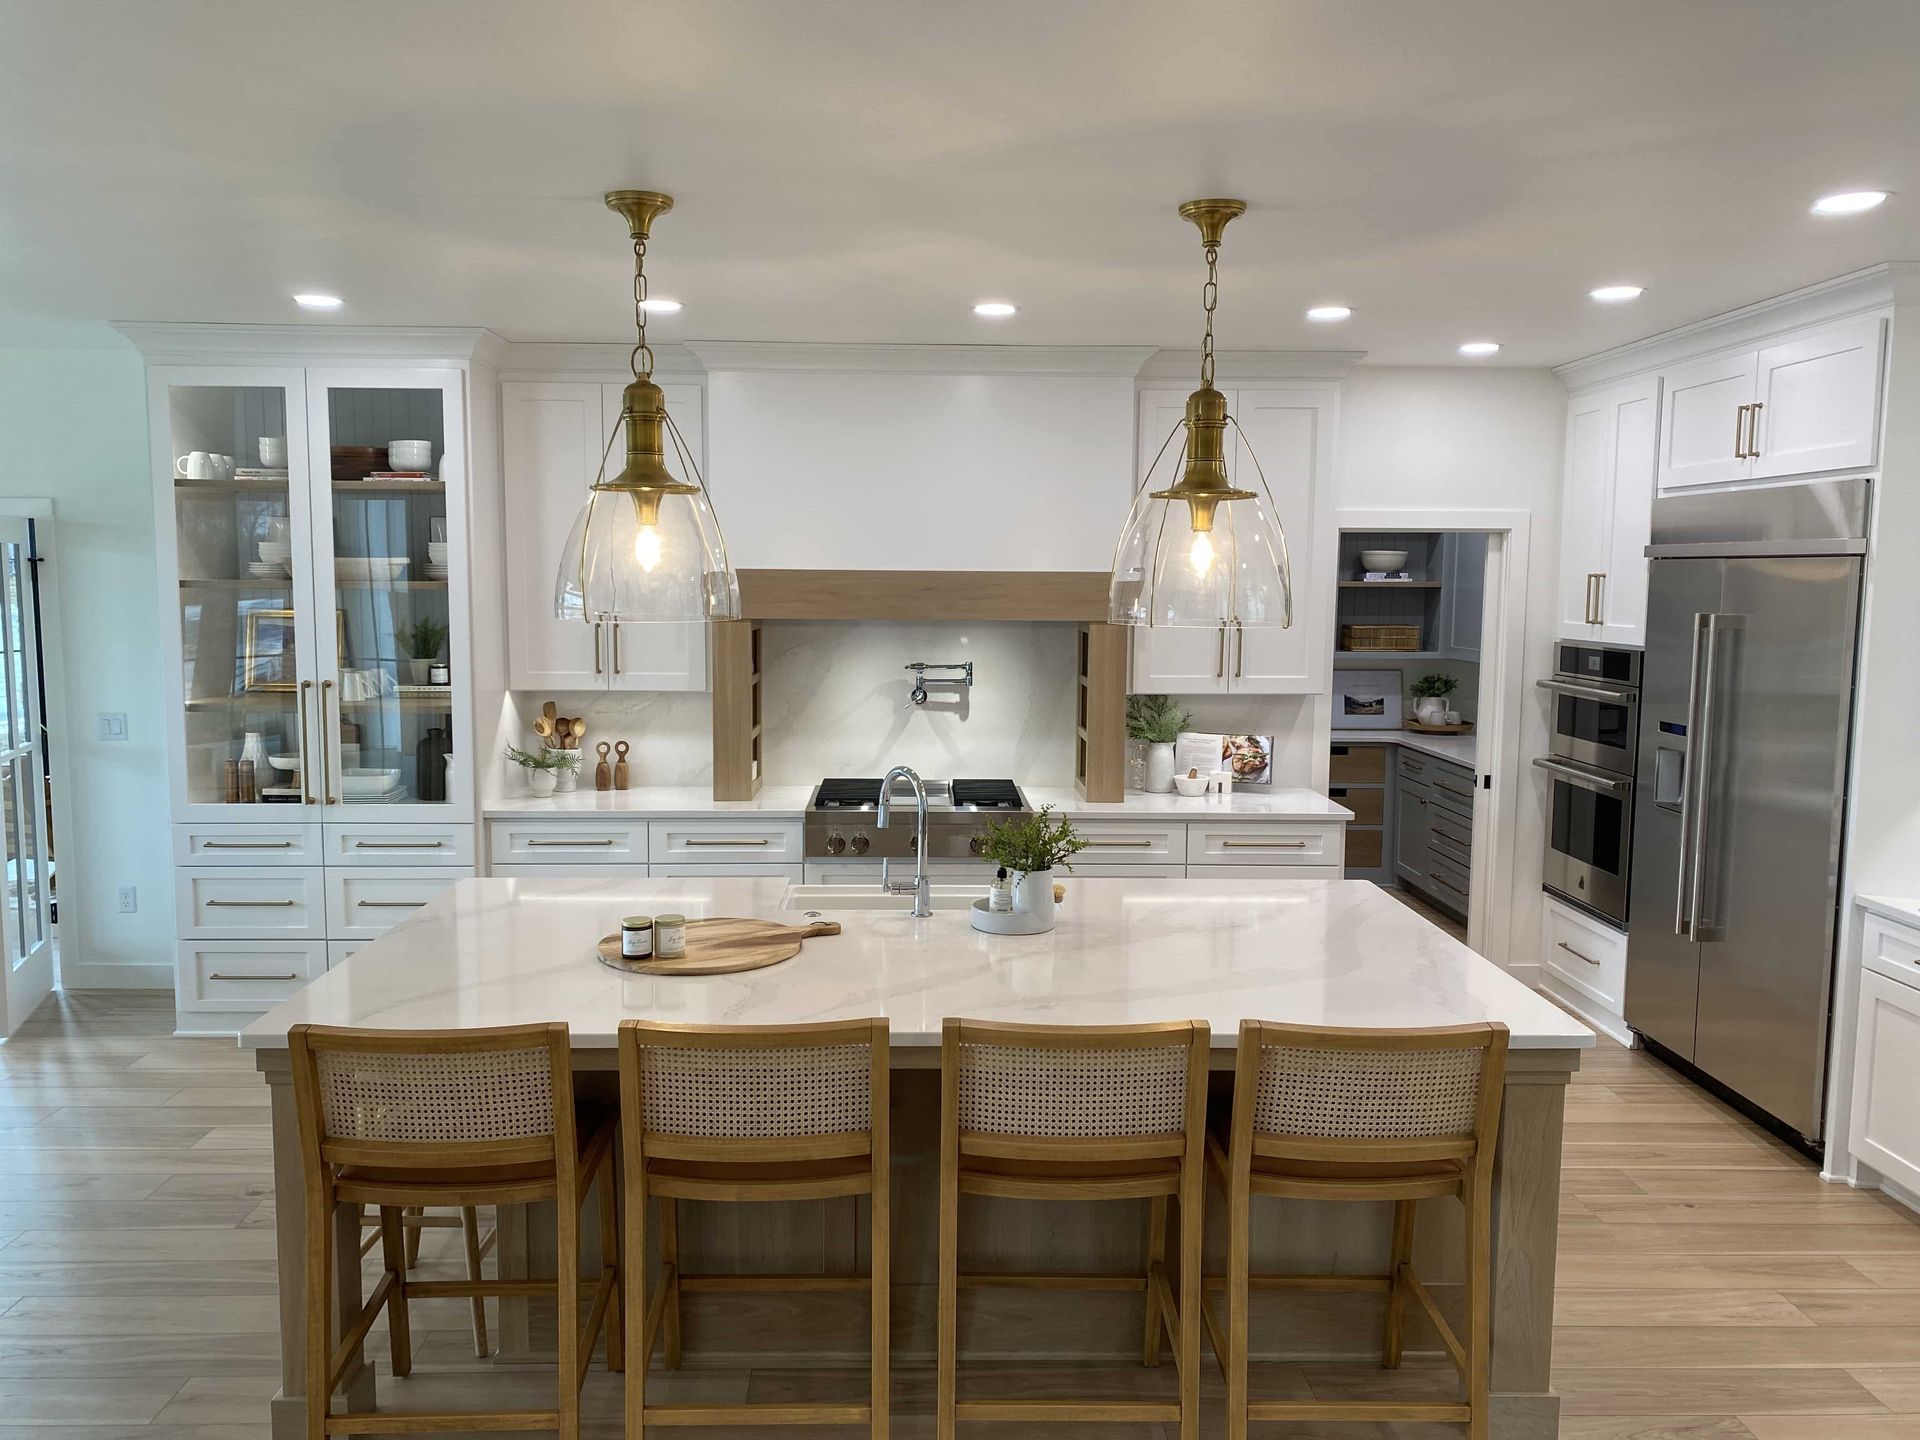 A kitchen with white cabinets and stainless steel appliances and a large island.